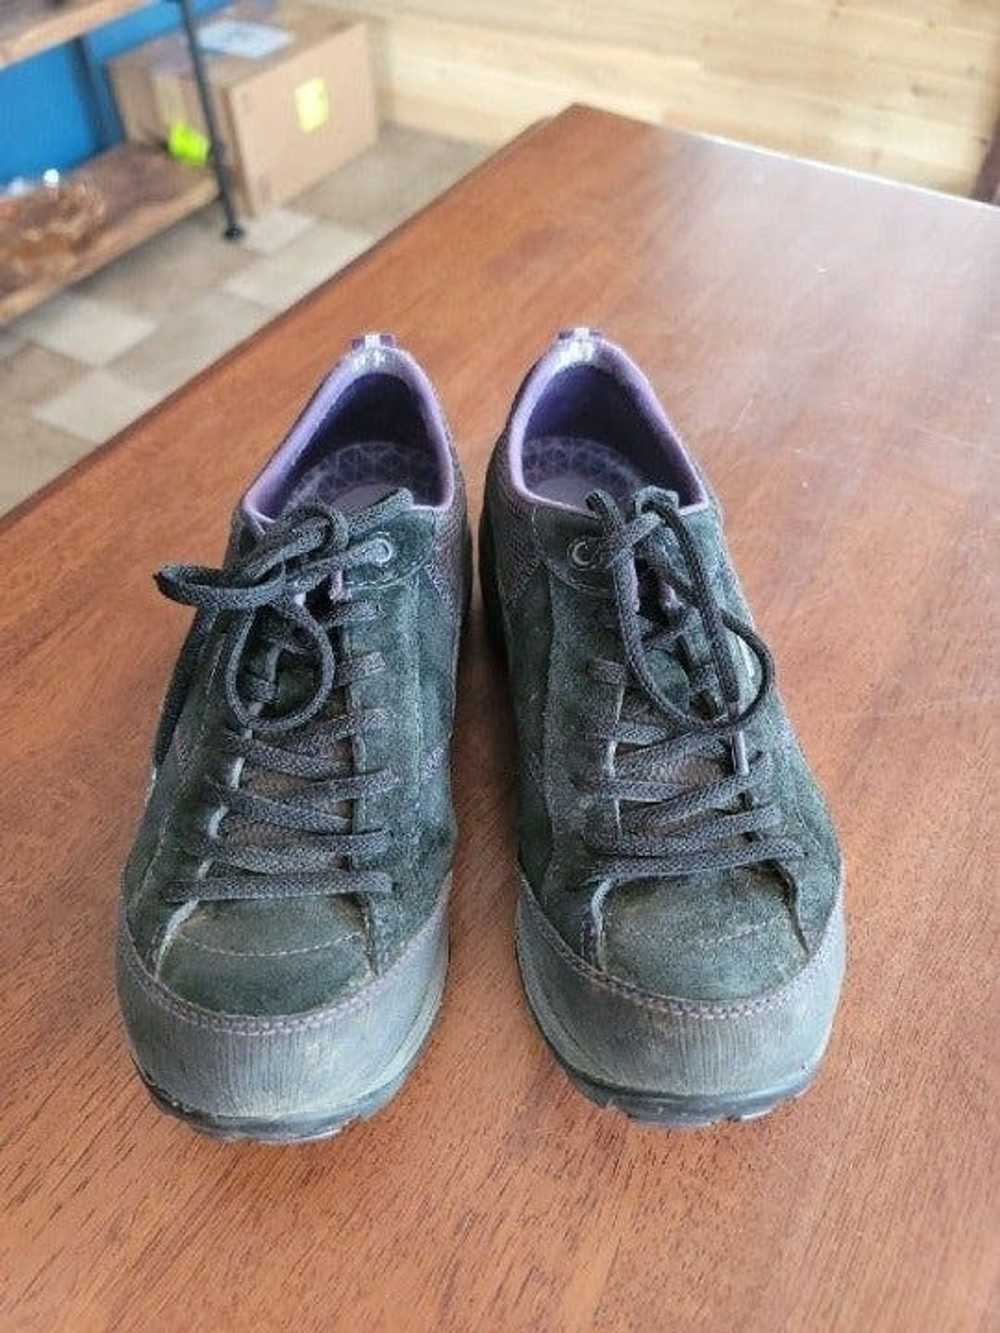 Other Women's Dansko Hiking Shoes Size 7.5-8 - image 2